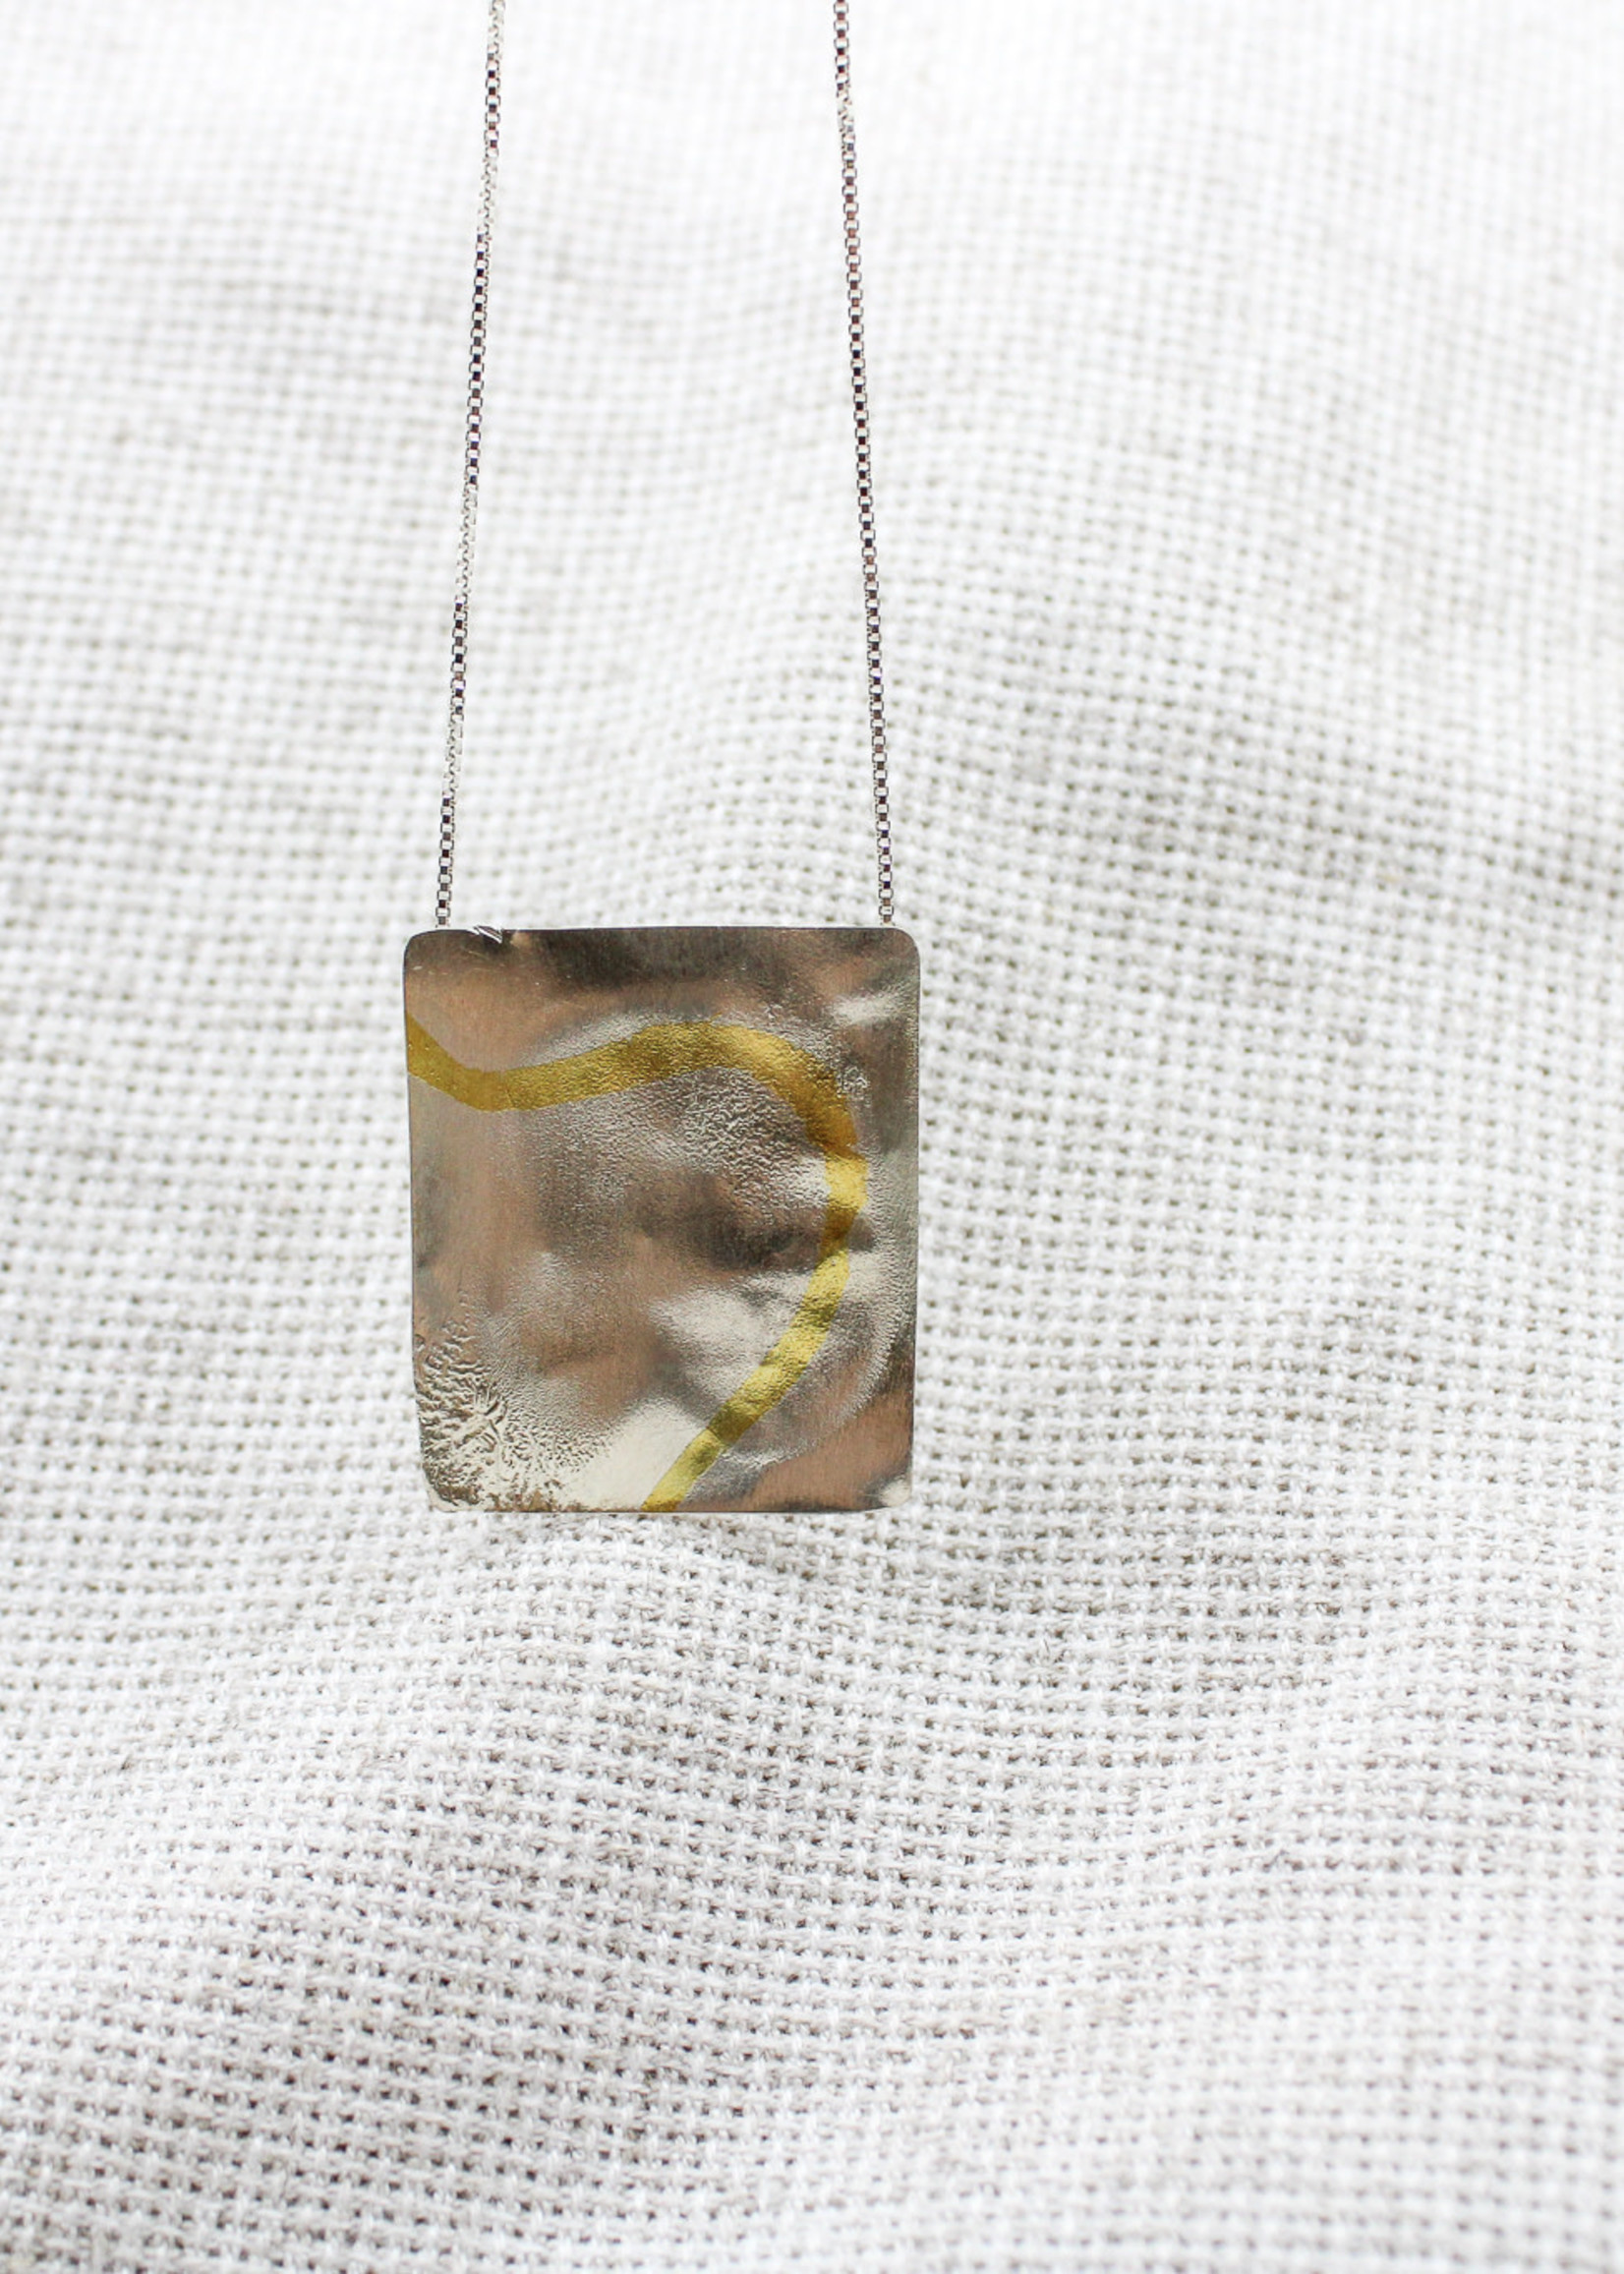 JEWELRY - Sterling Silver, 24 k Gold Patina on Necklace